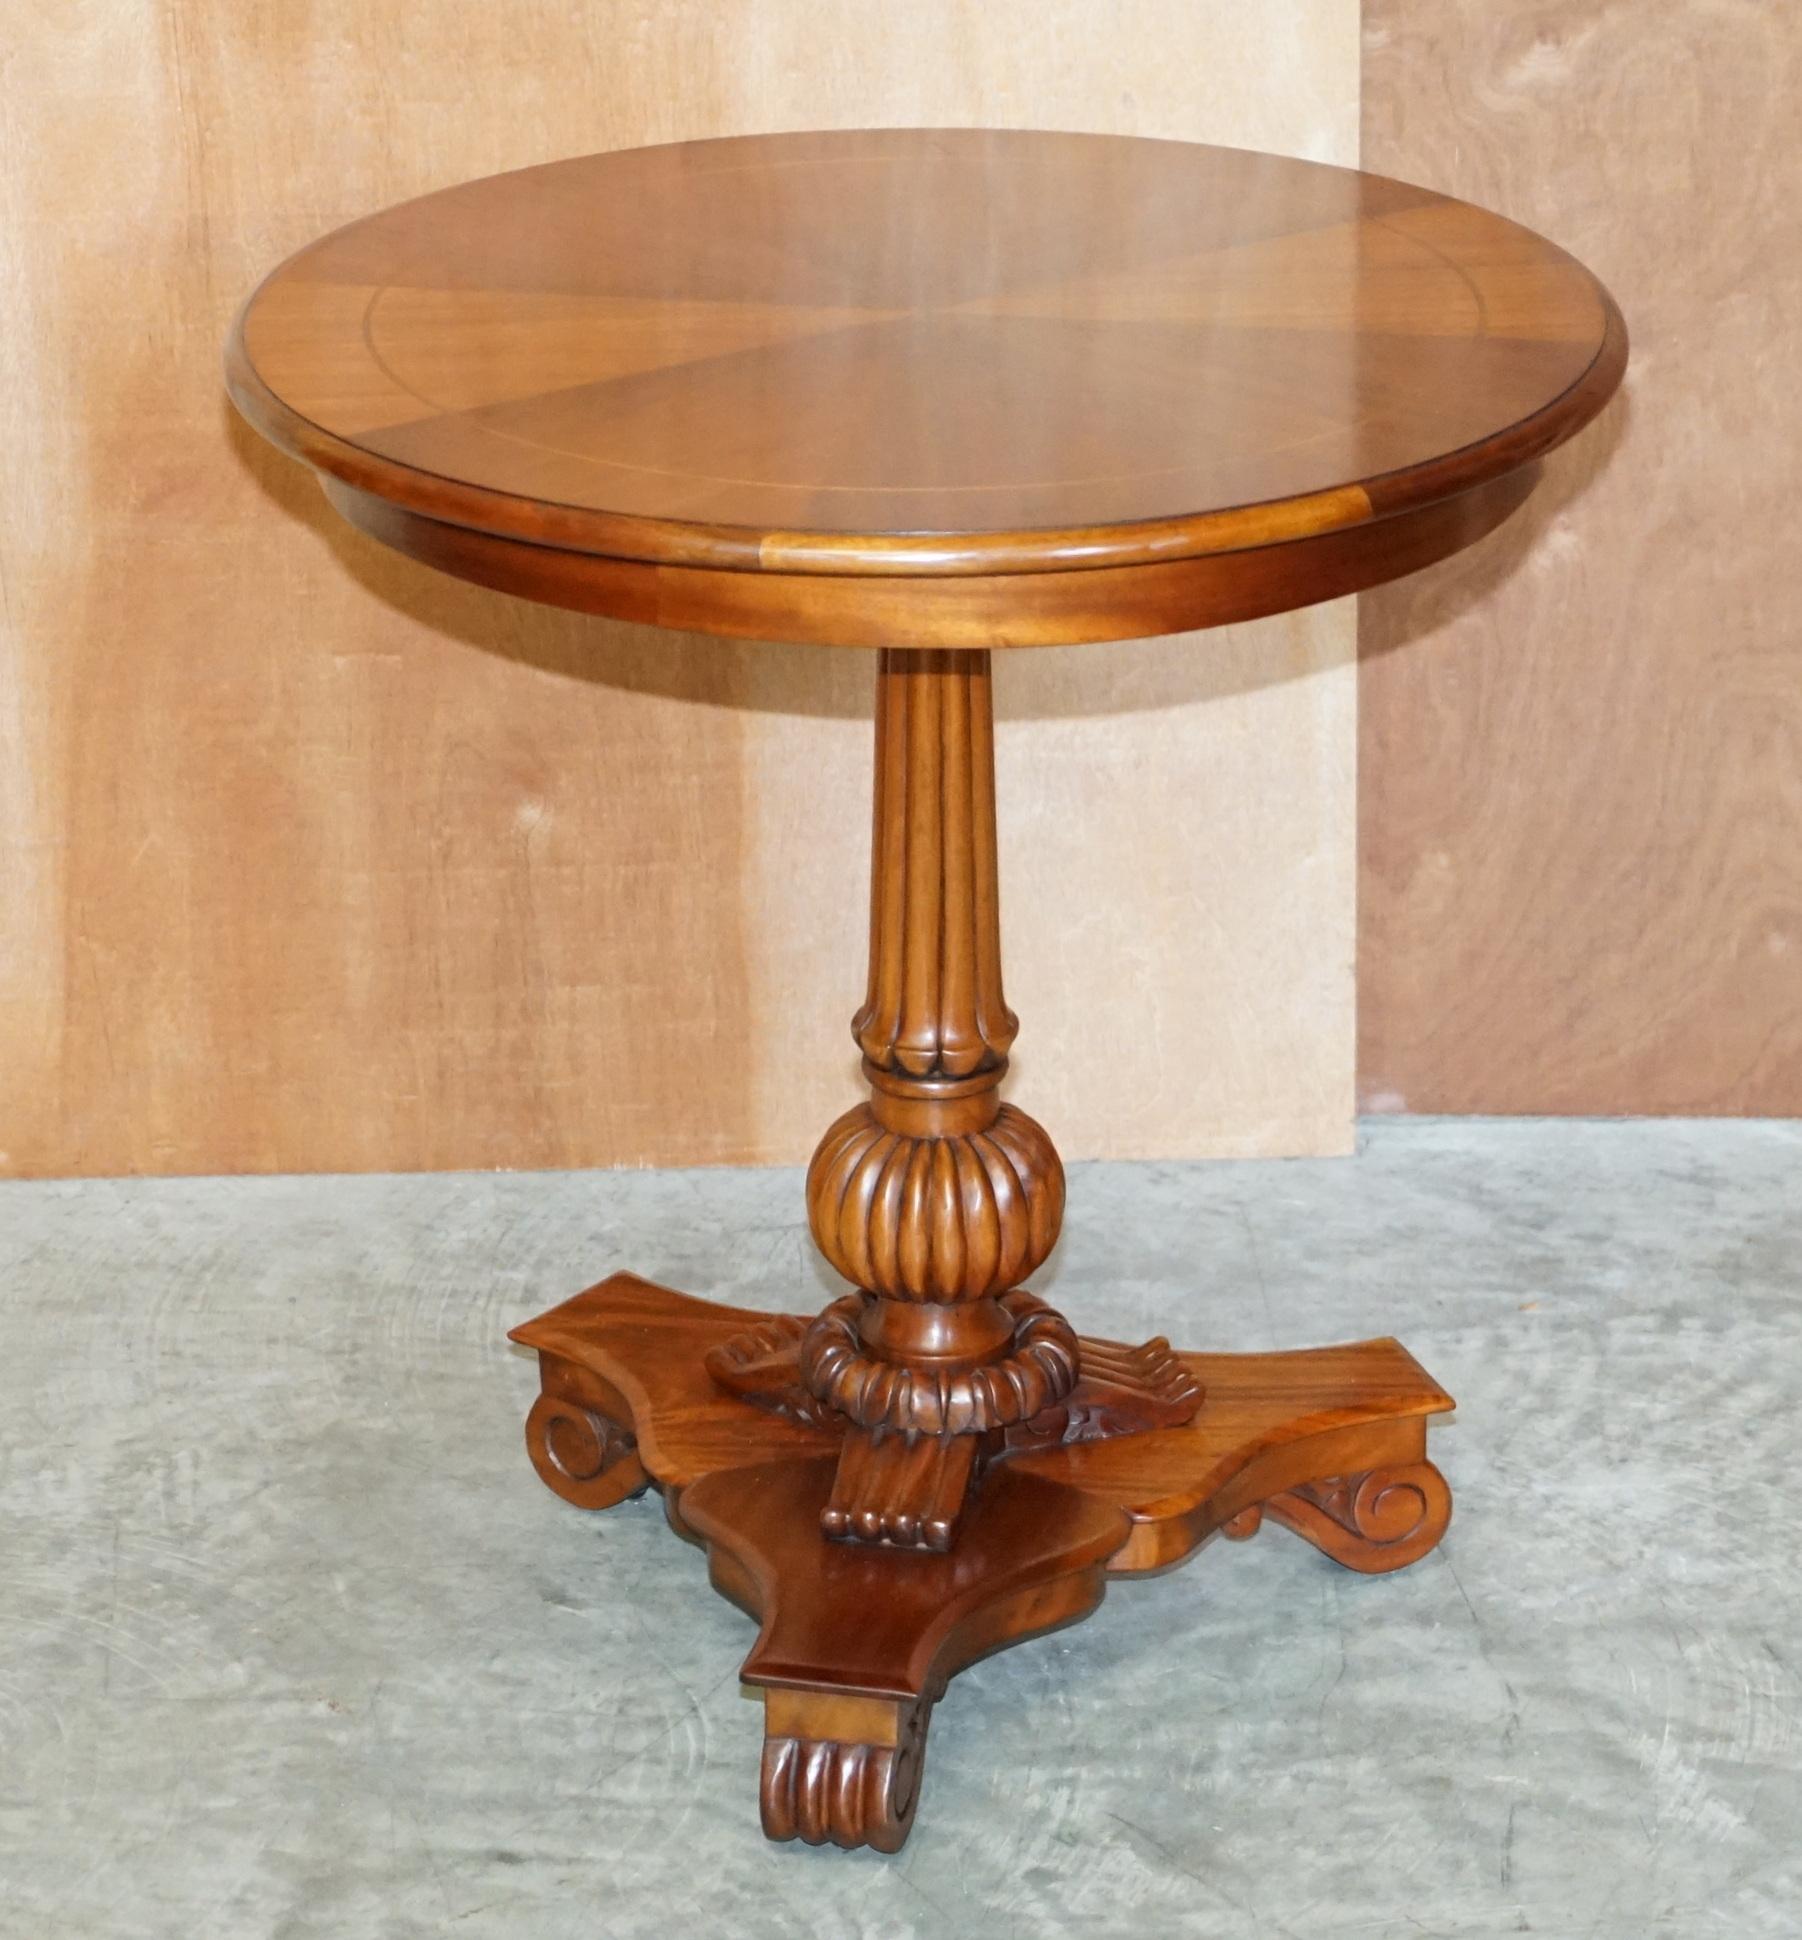 We are delighted to offer this lovely Ralph Lauren American Mahogany William IV style large side or occasional table

A very good looking, well made and decorative piece, ideally suited as large lamp table with a nice picture frame and glass of